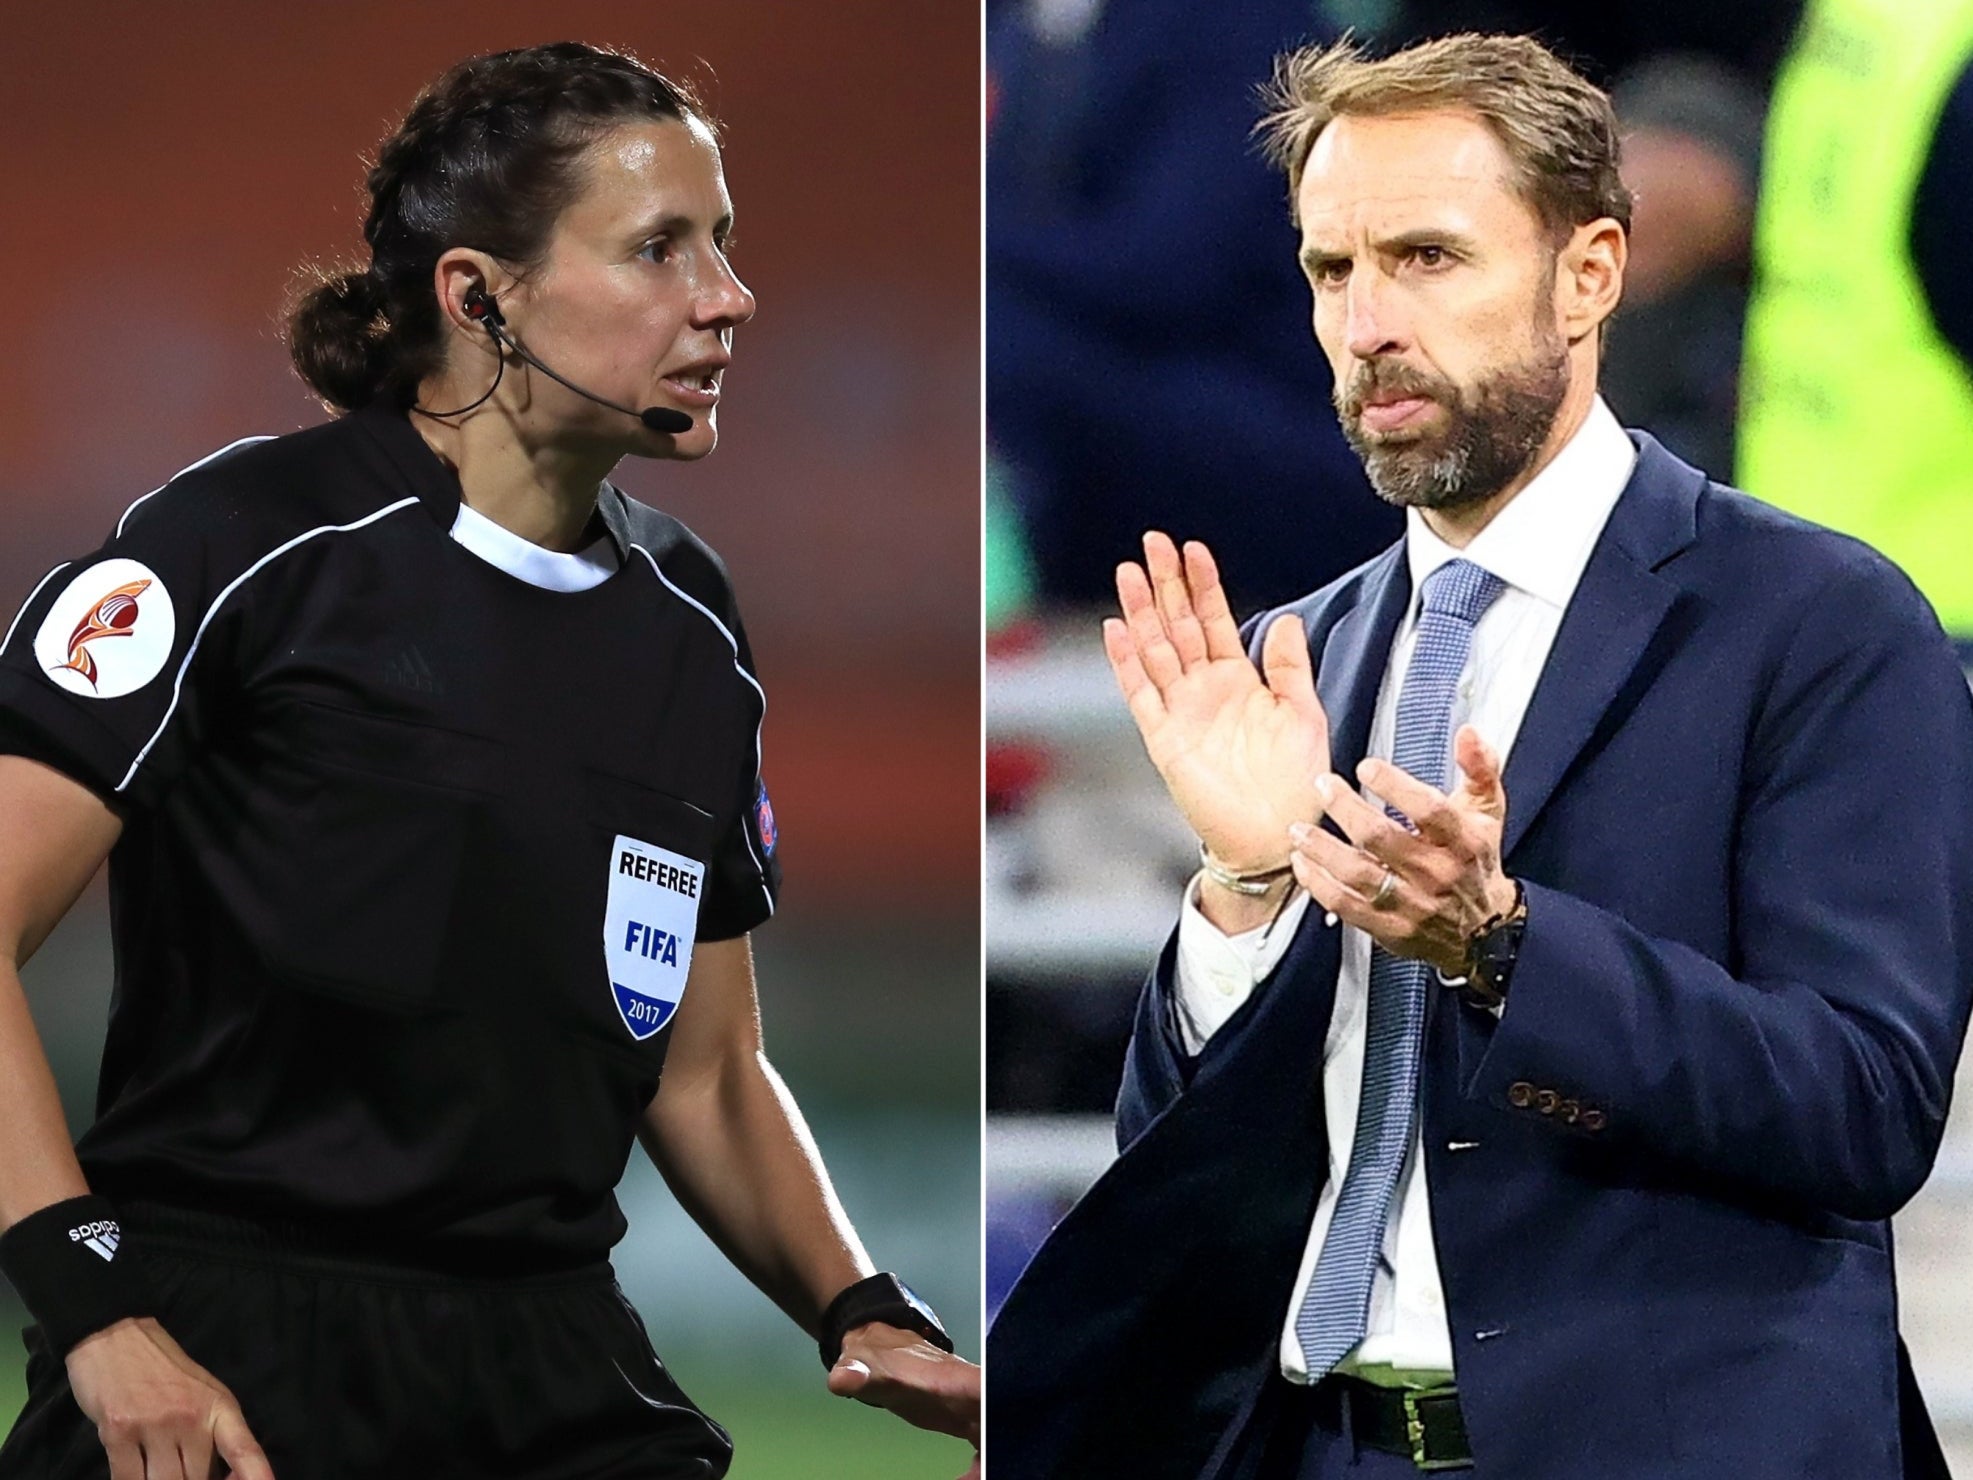 Kateryna Monzul will referee England’s World Cup qualifier against Andorra as Gareth Southgate’s side look to move a step closer to Qatar 2022